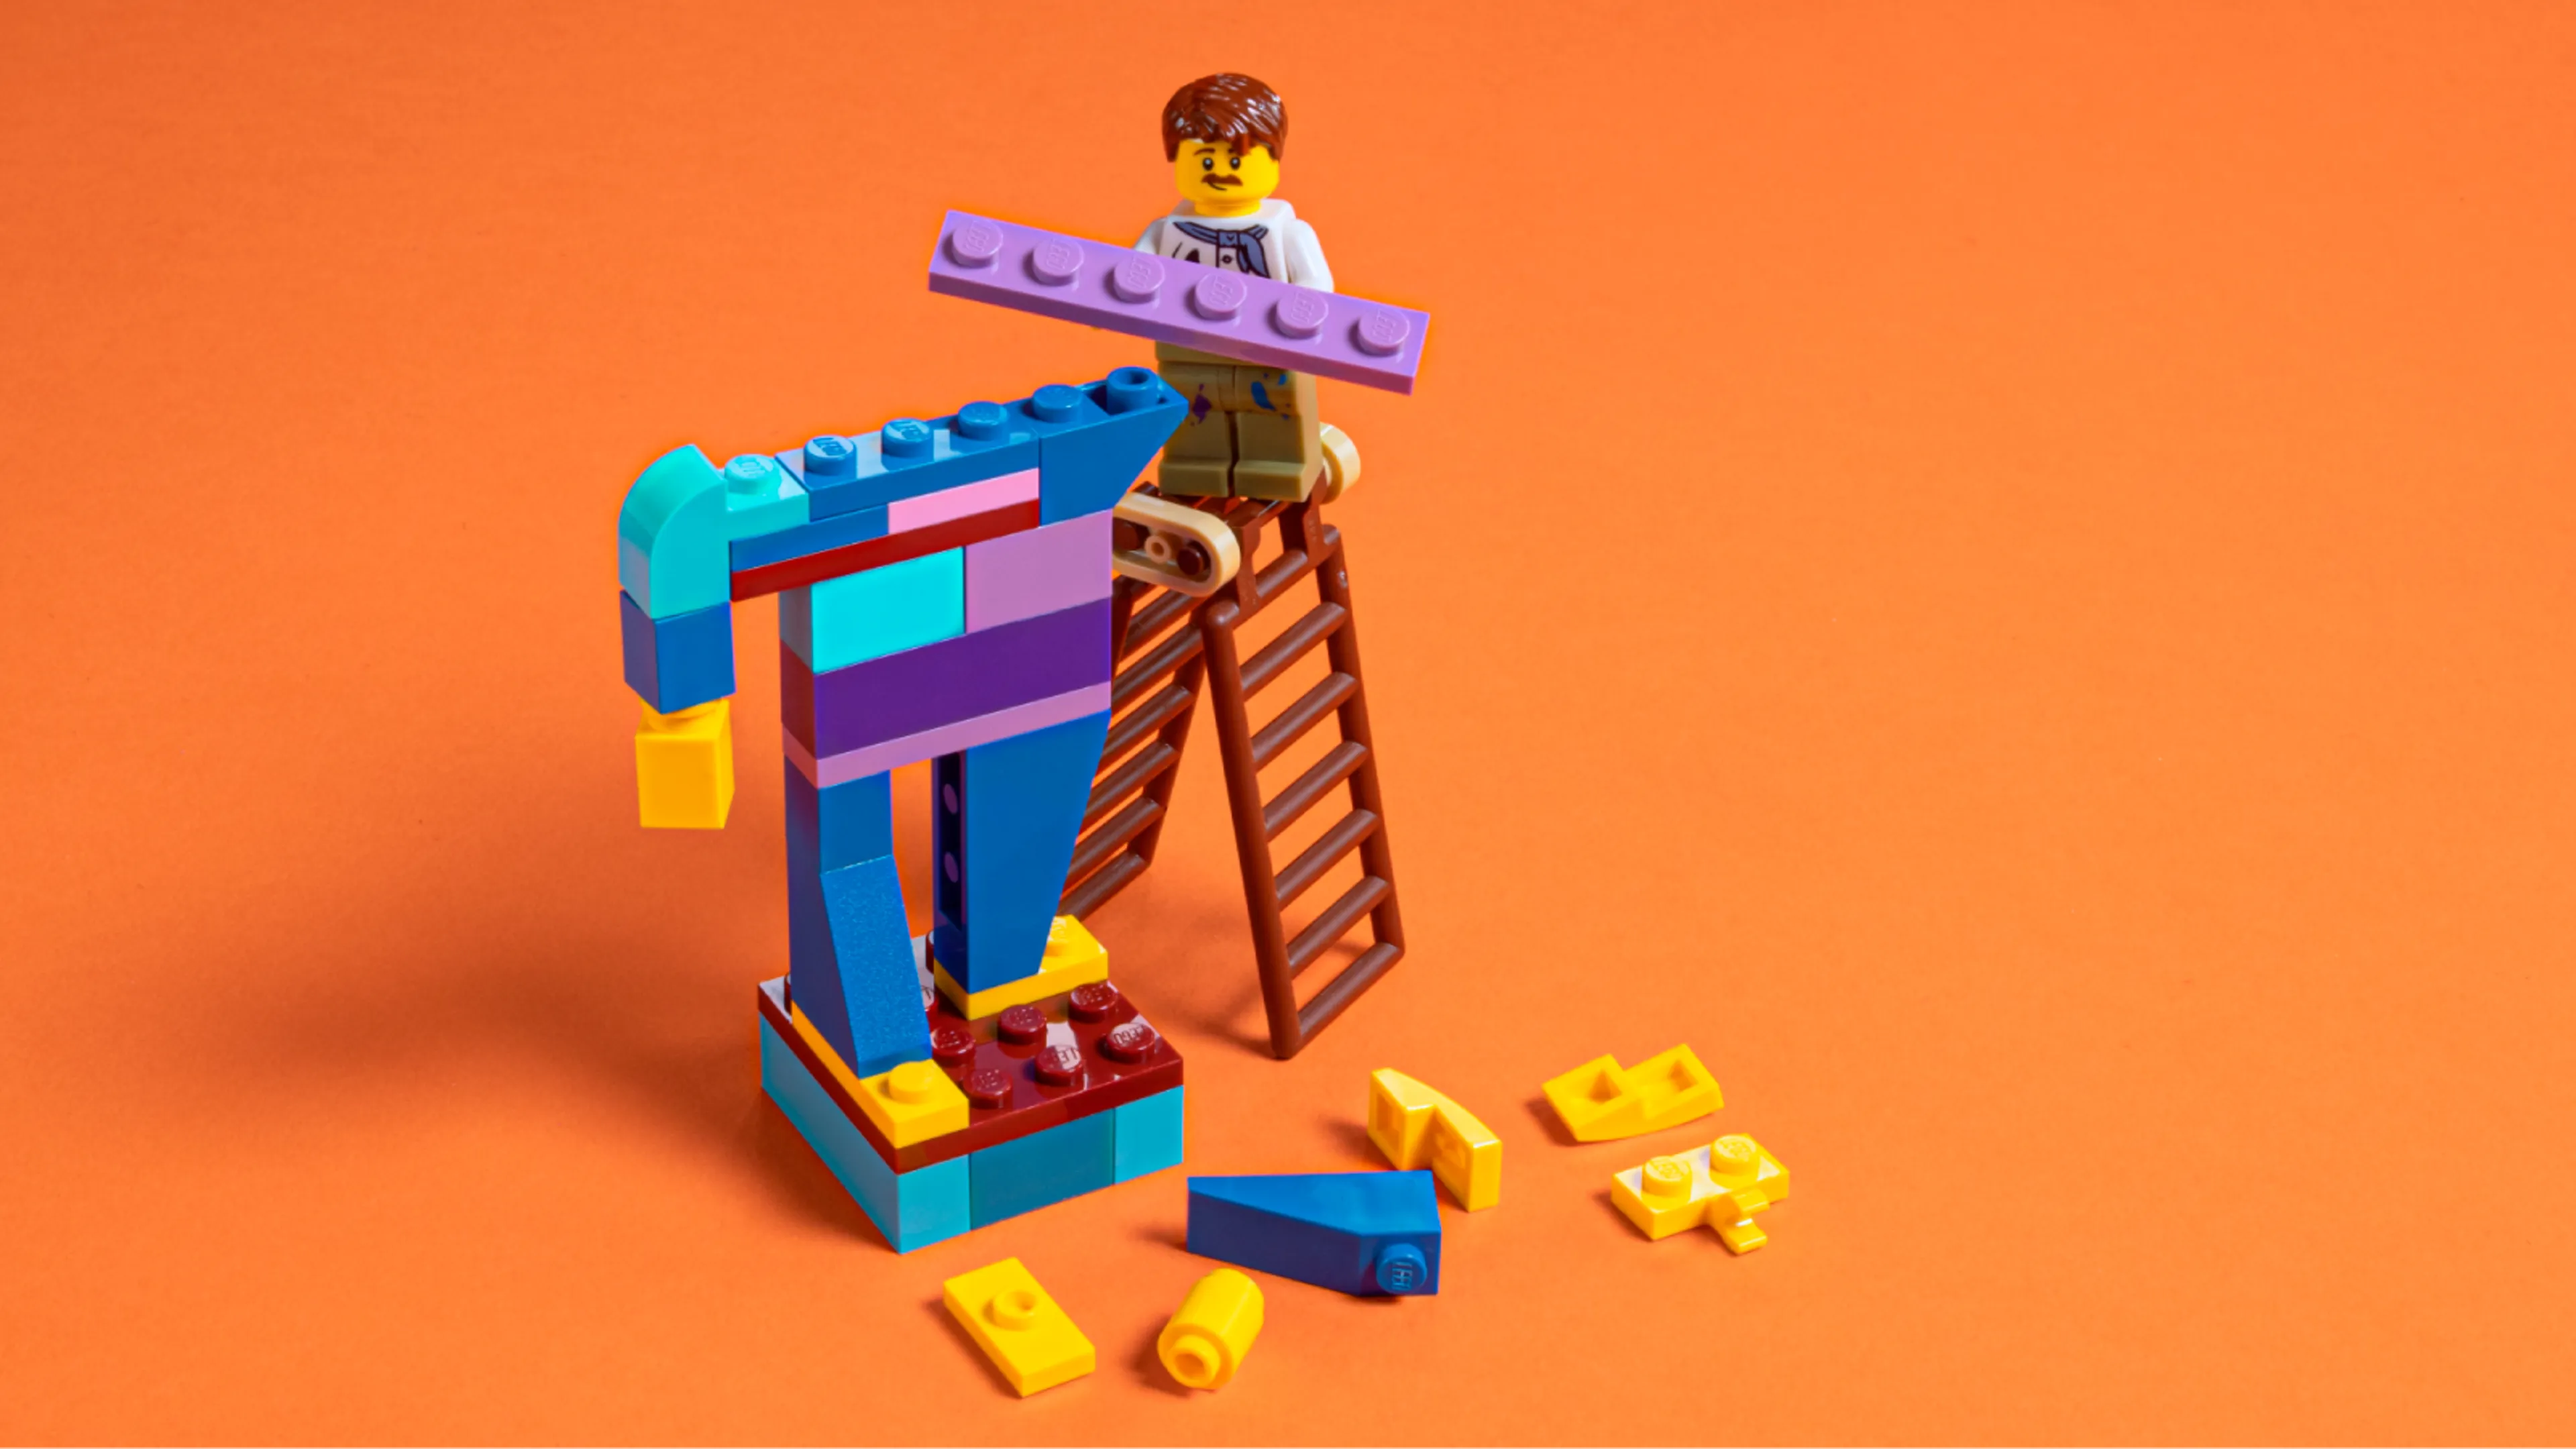 A minifigure who continues to build the LEGO statue